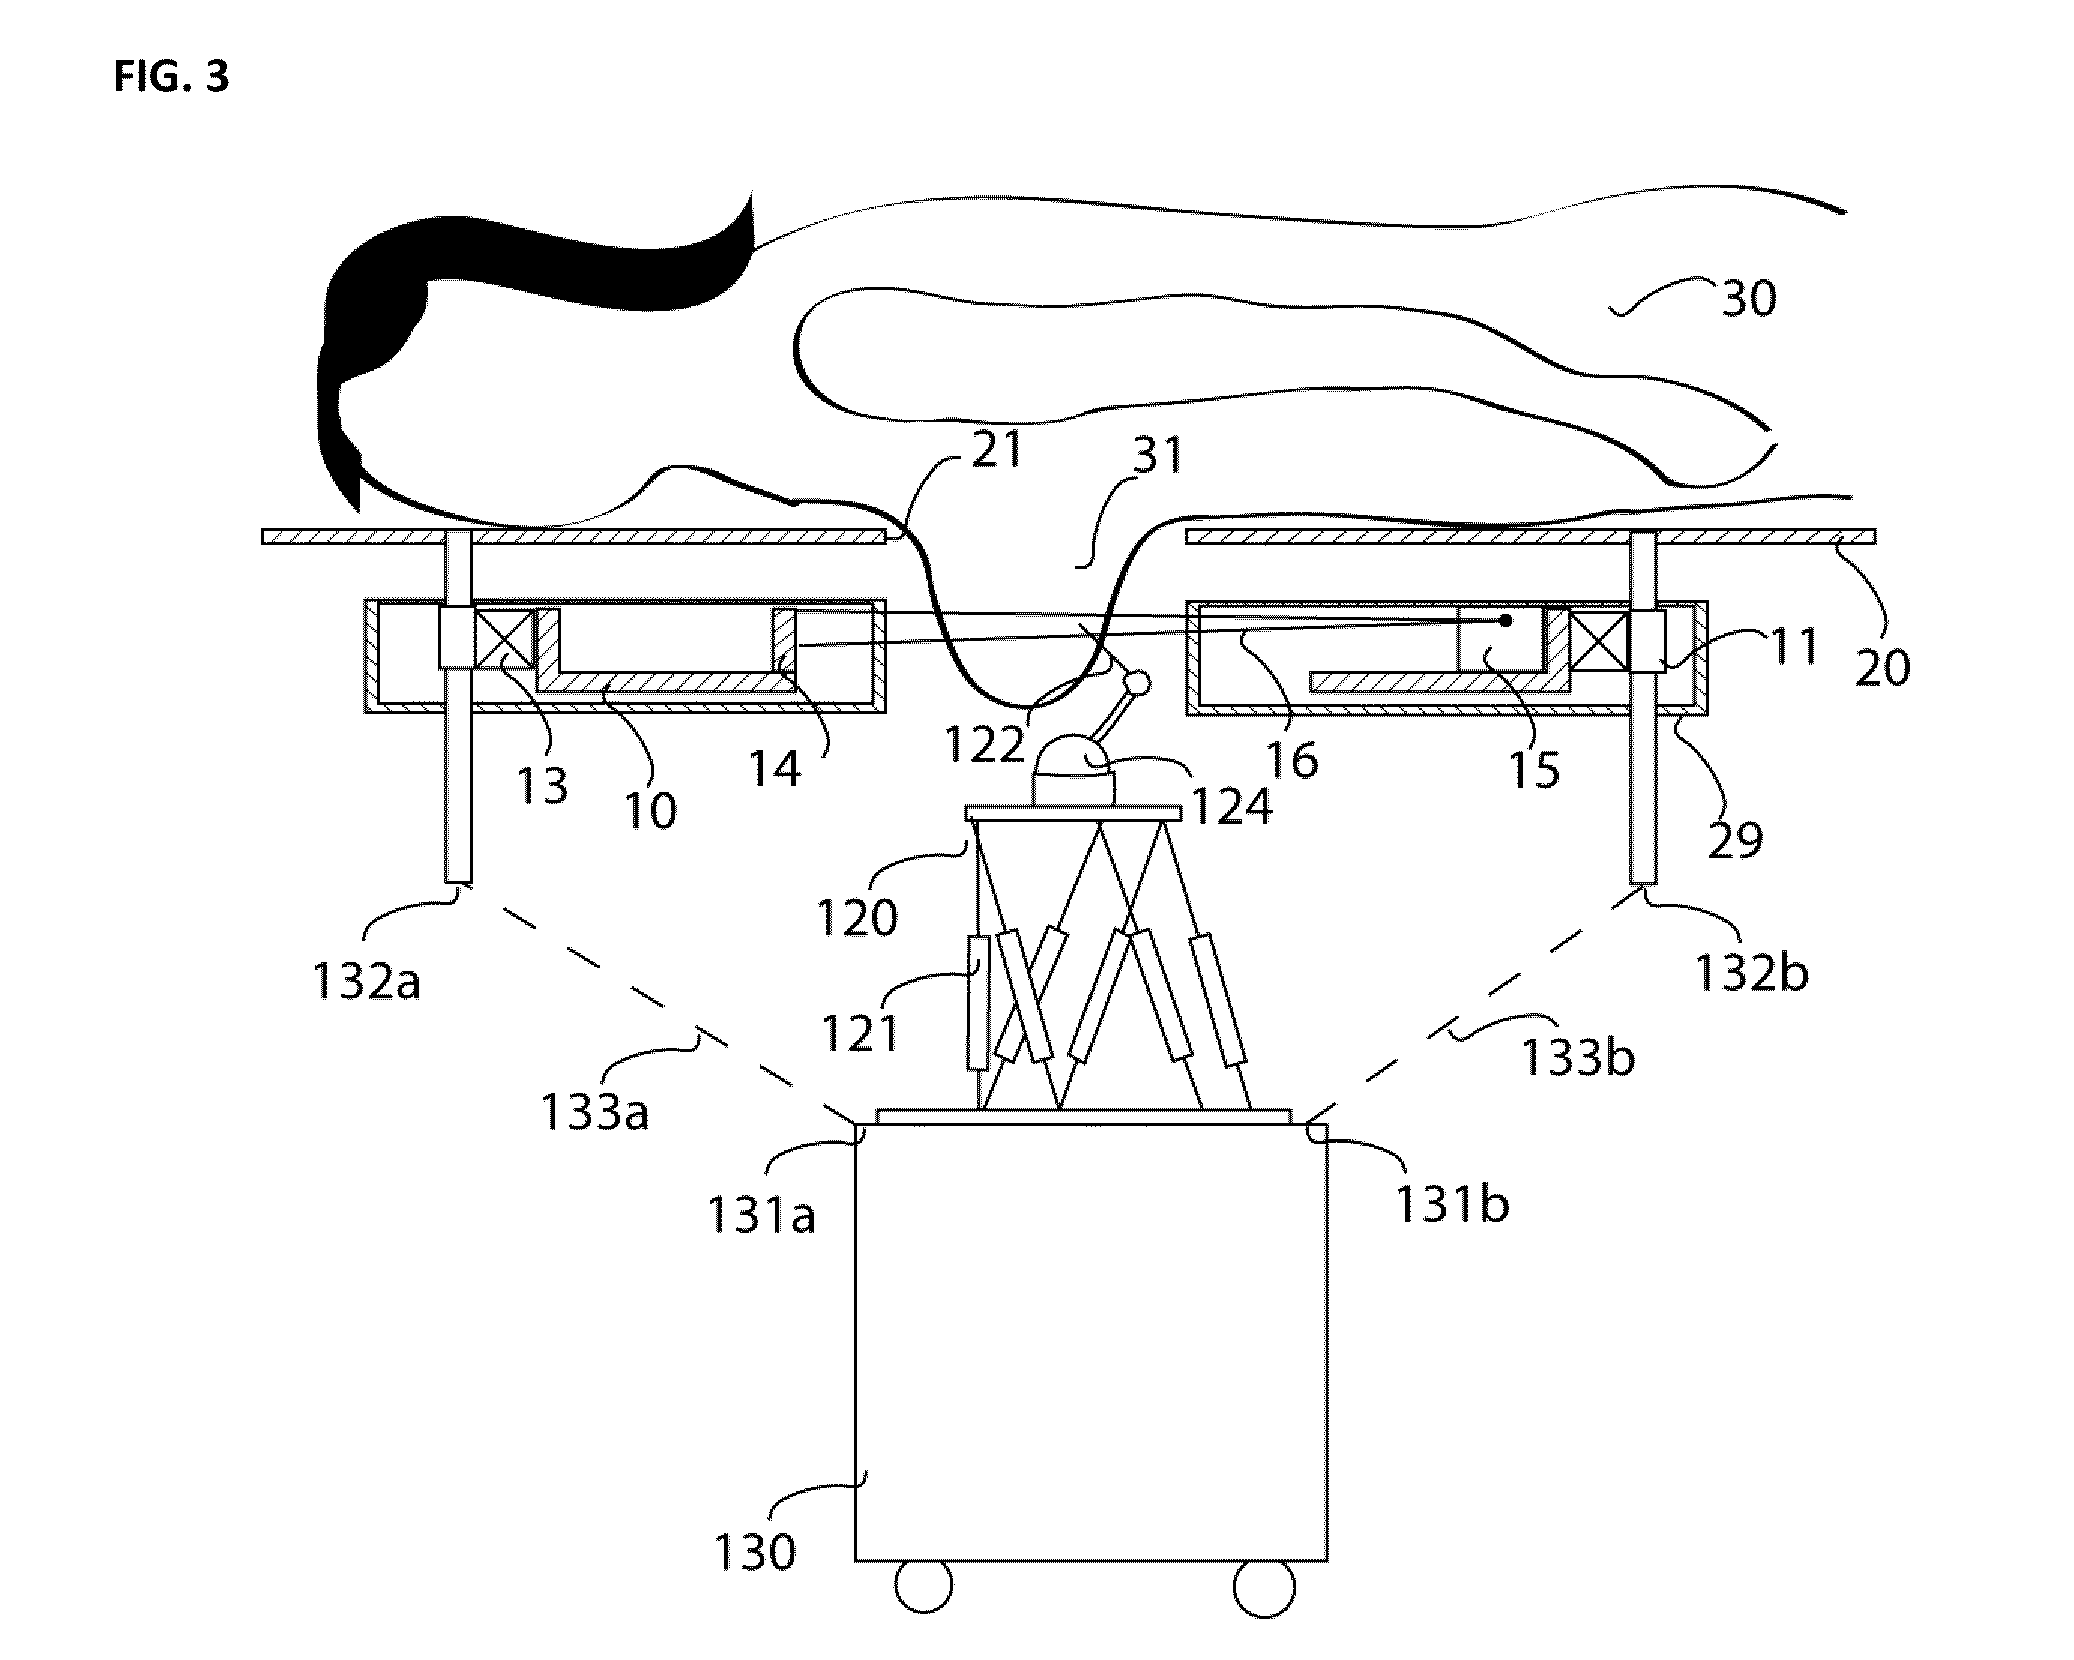 Modular System for Diagnosis and Surgical Operation on a Breast